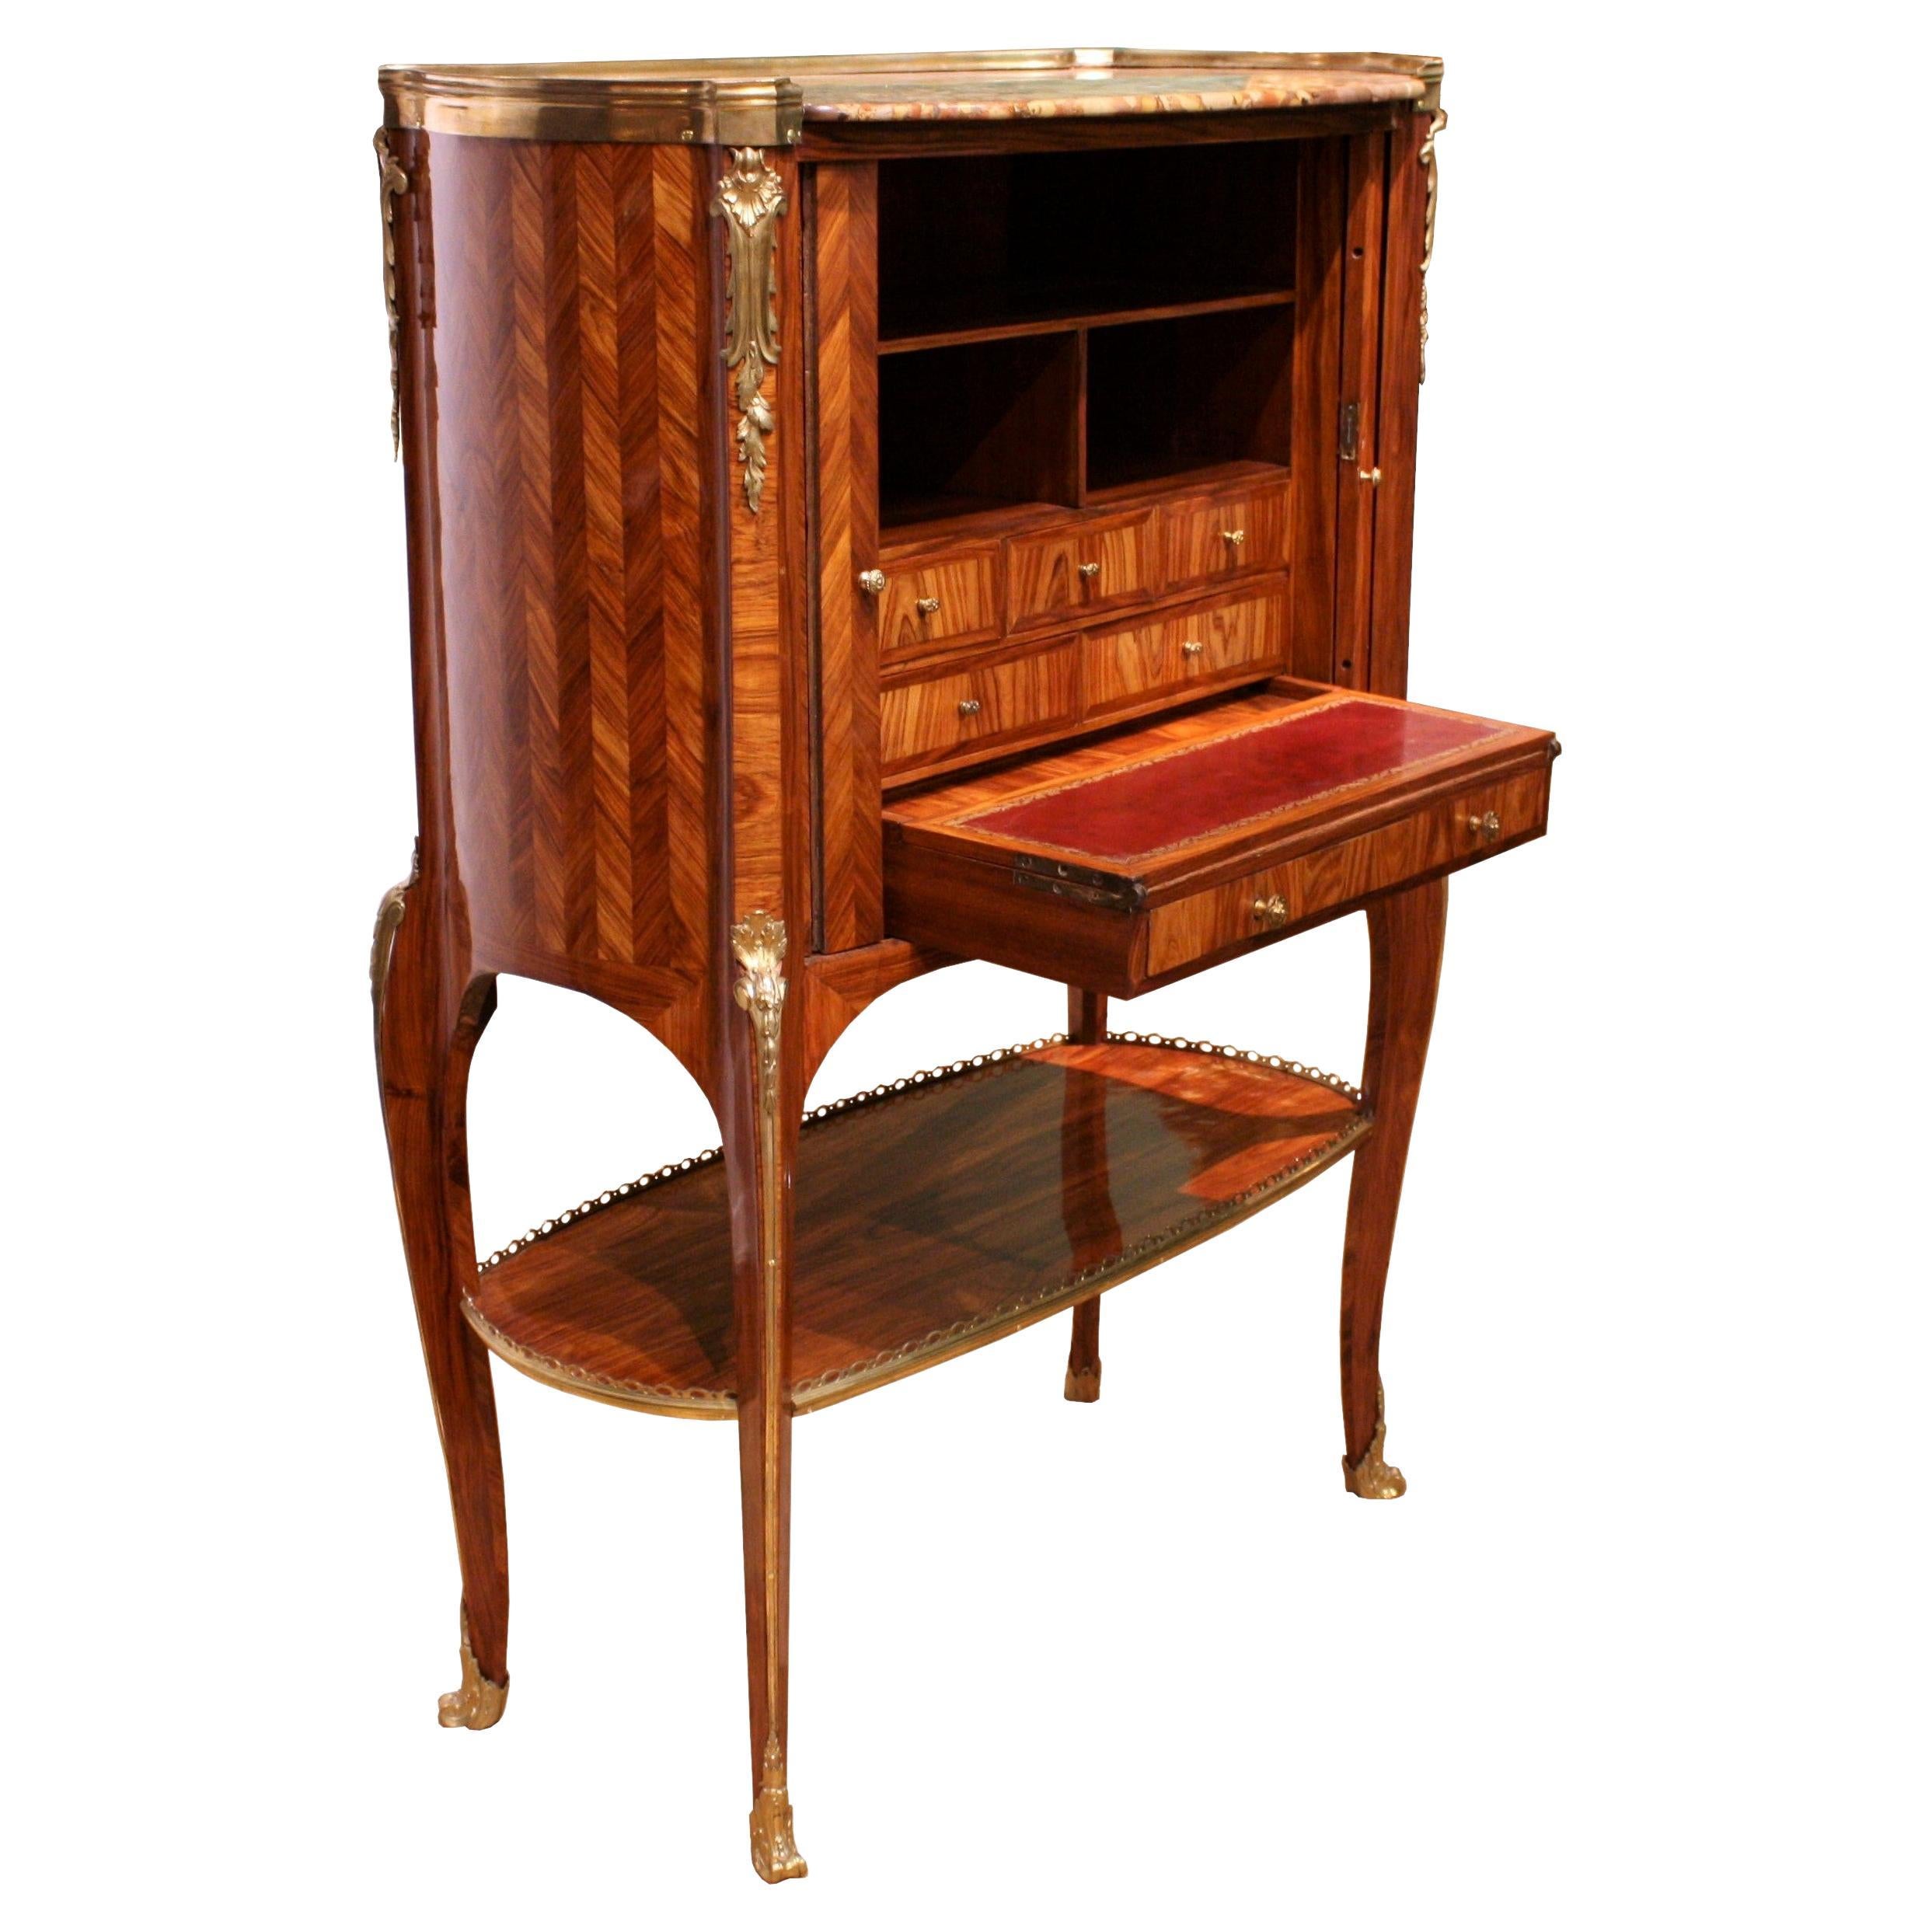 French 18th C. Louis XV/XVI Transitional Ormolu Mounted Secretaire by RVLC For Sale